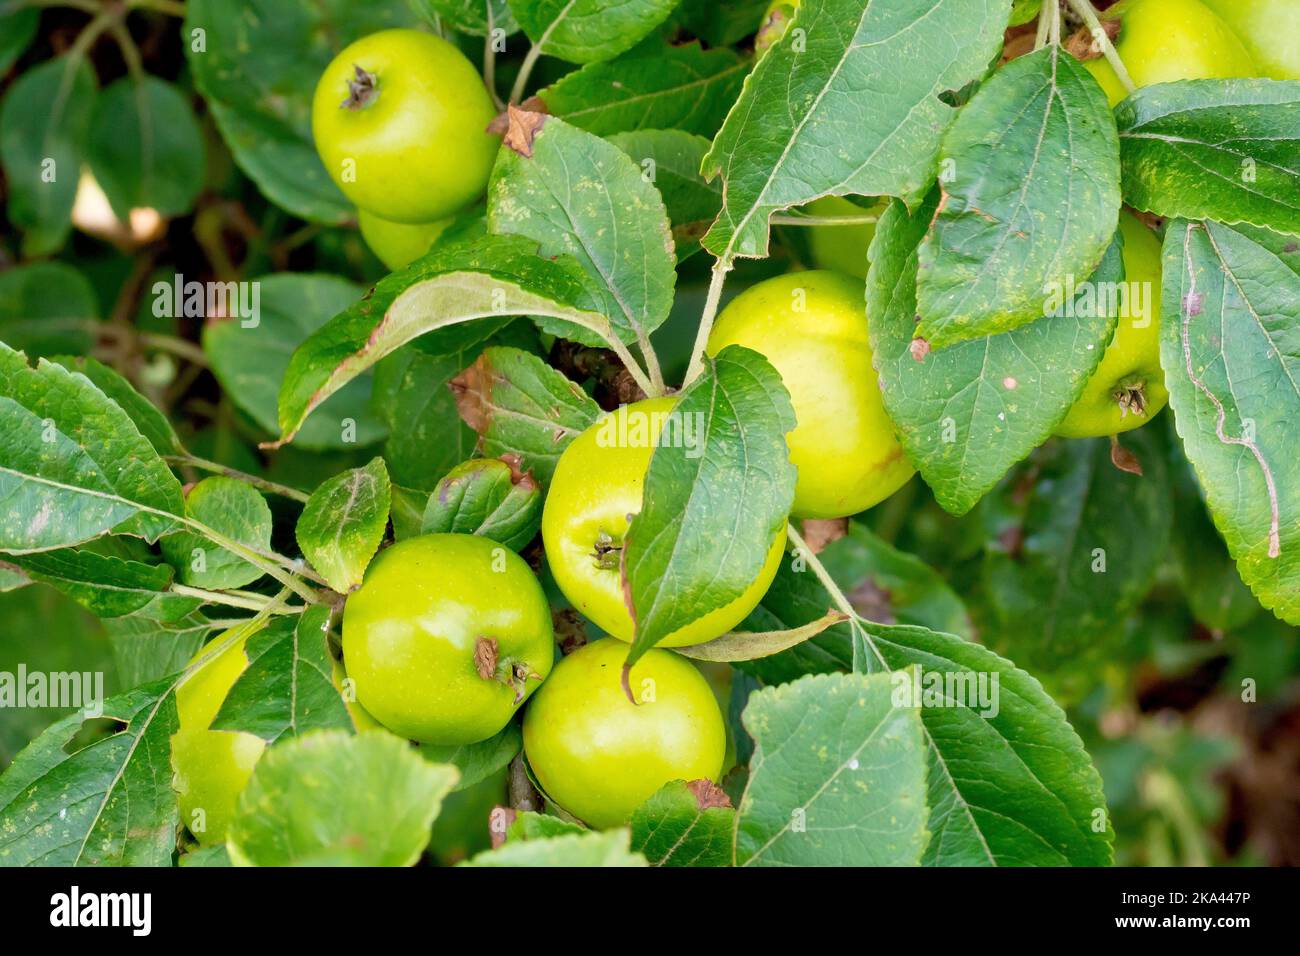 Crab Apple (malus sylvestris), close up of a cluster of fruits or apples ripening amongst the leaves on a tree. Stock Photo